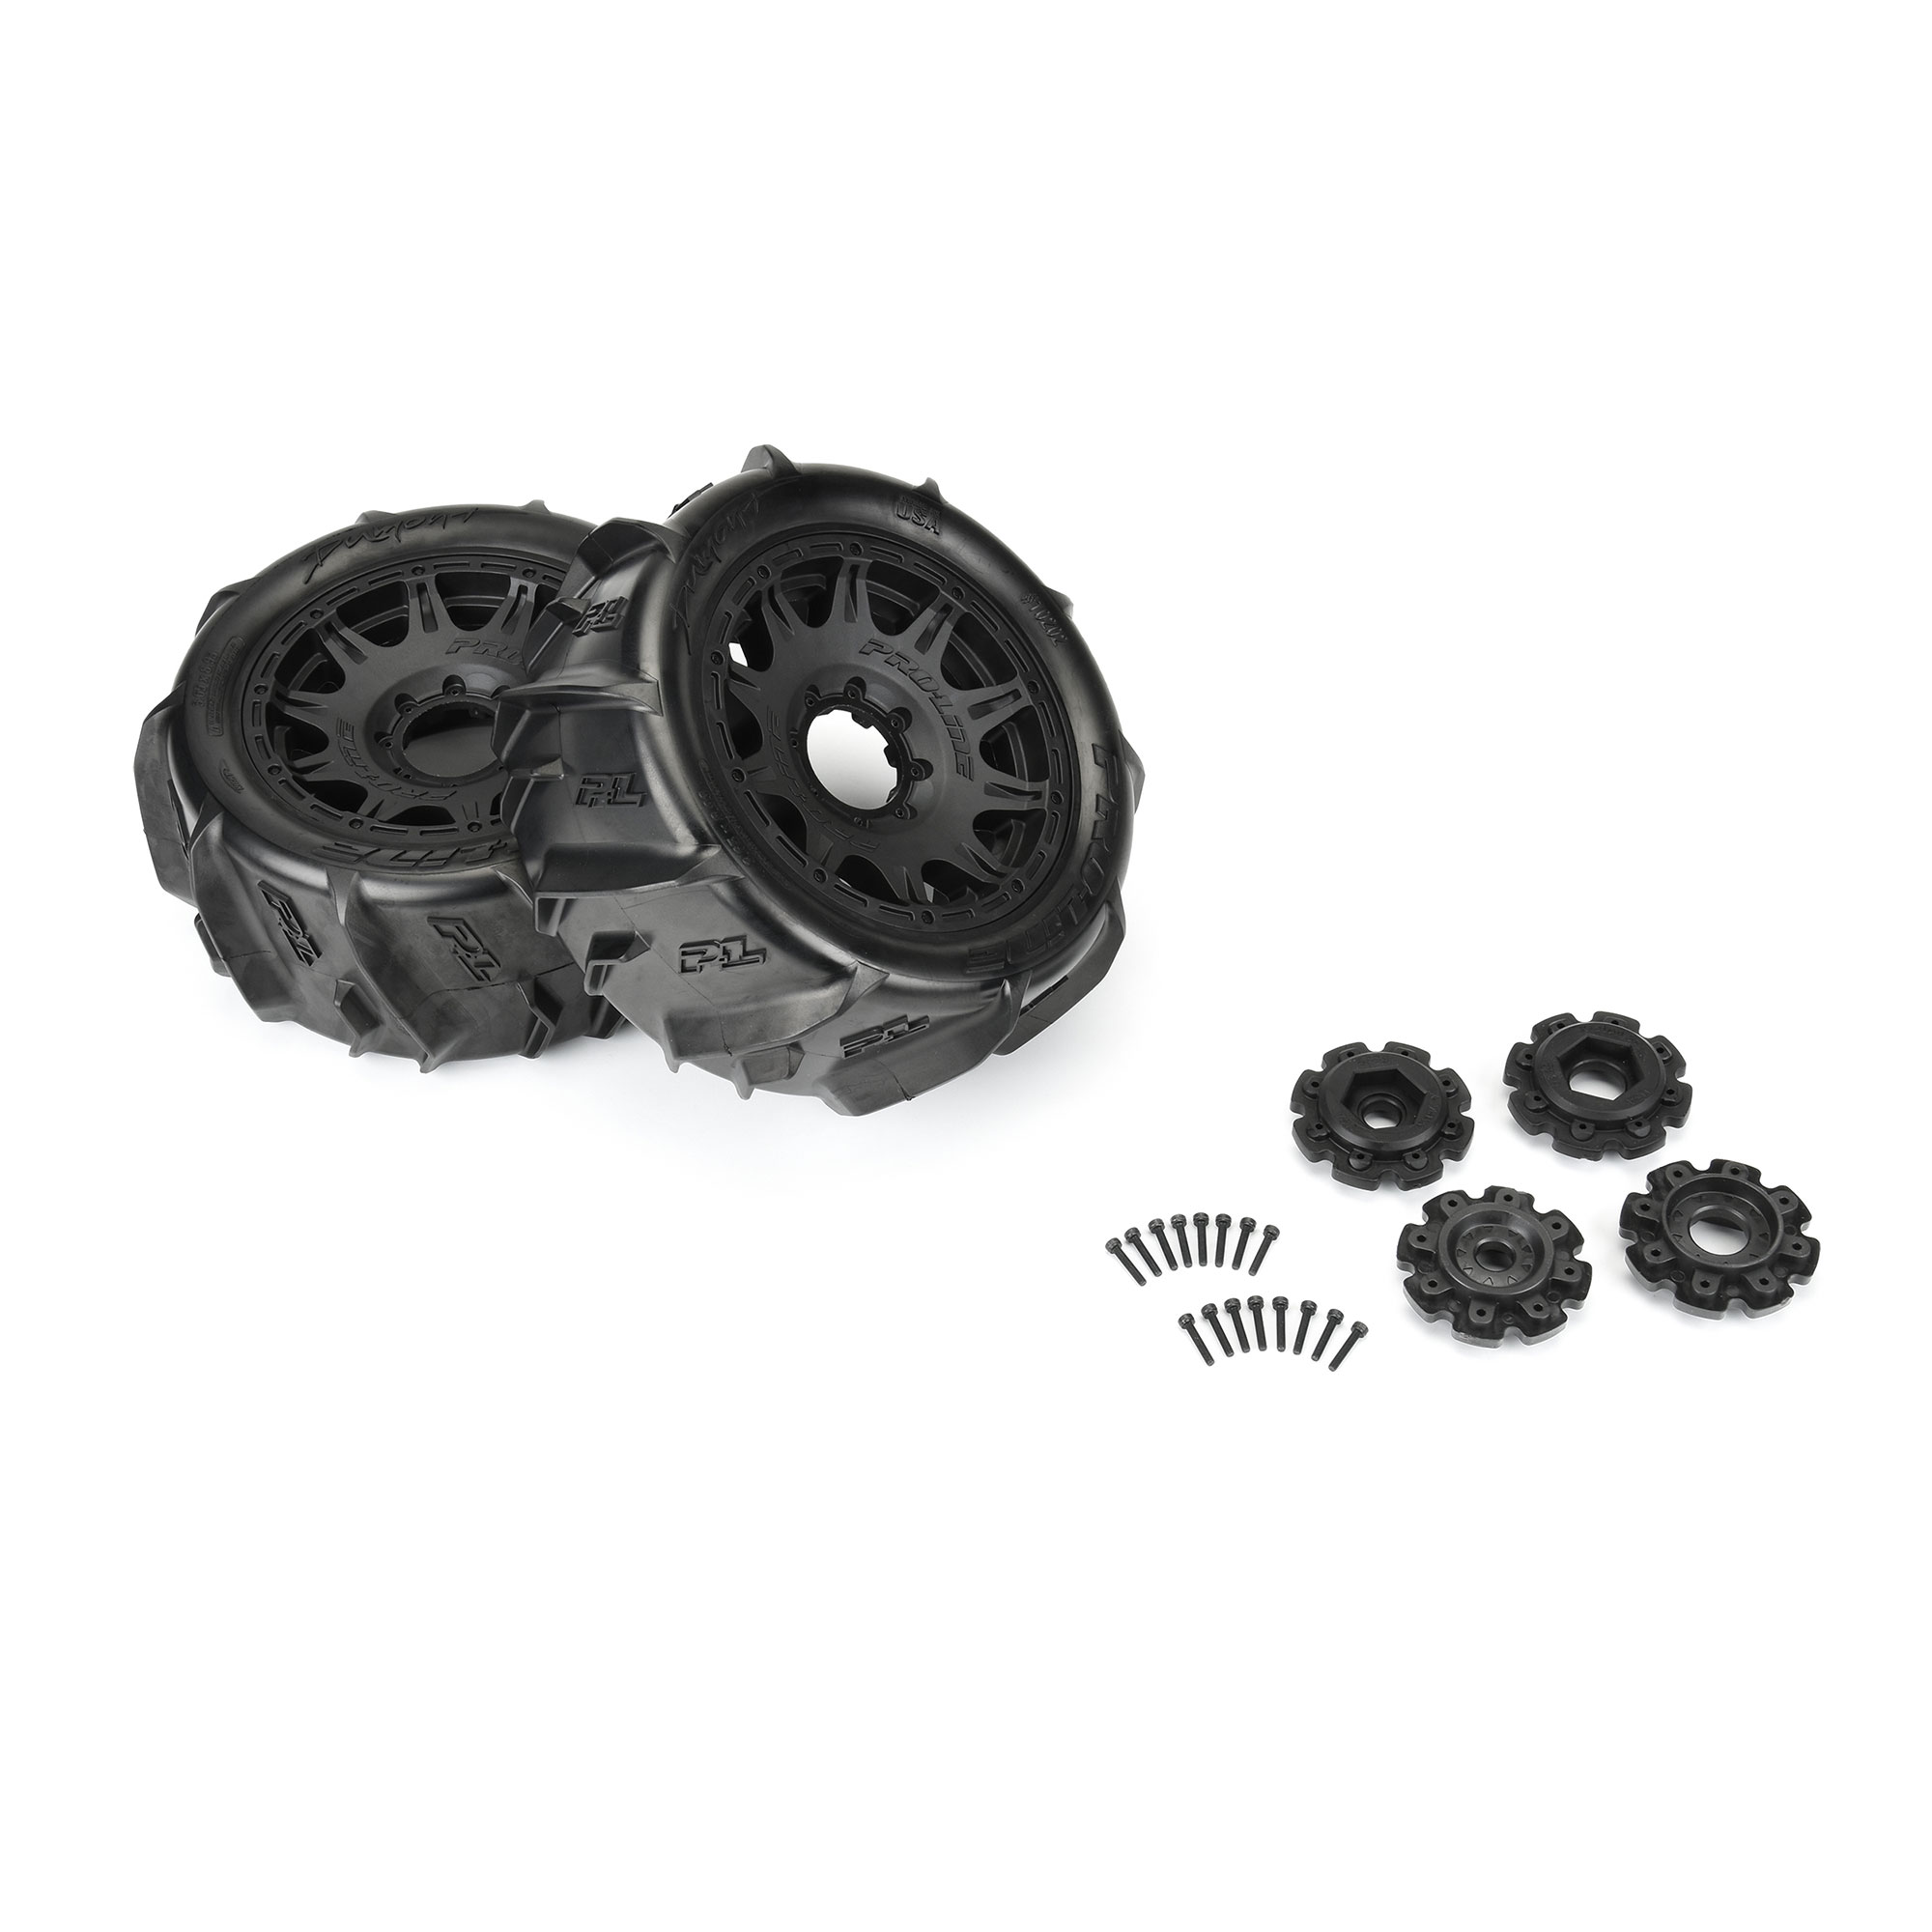 Pneu gonflable - 255 x 80 Off-road tire